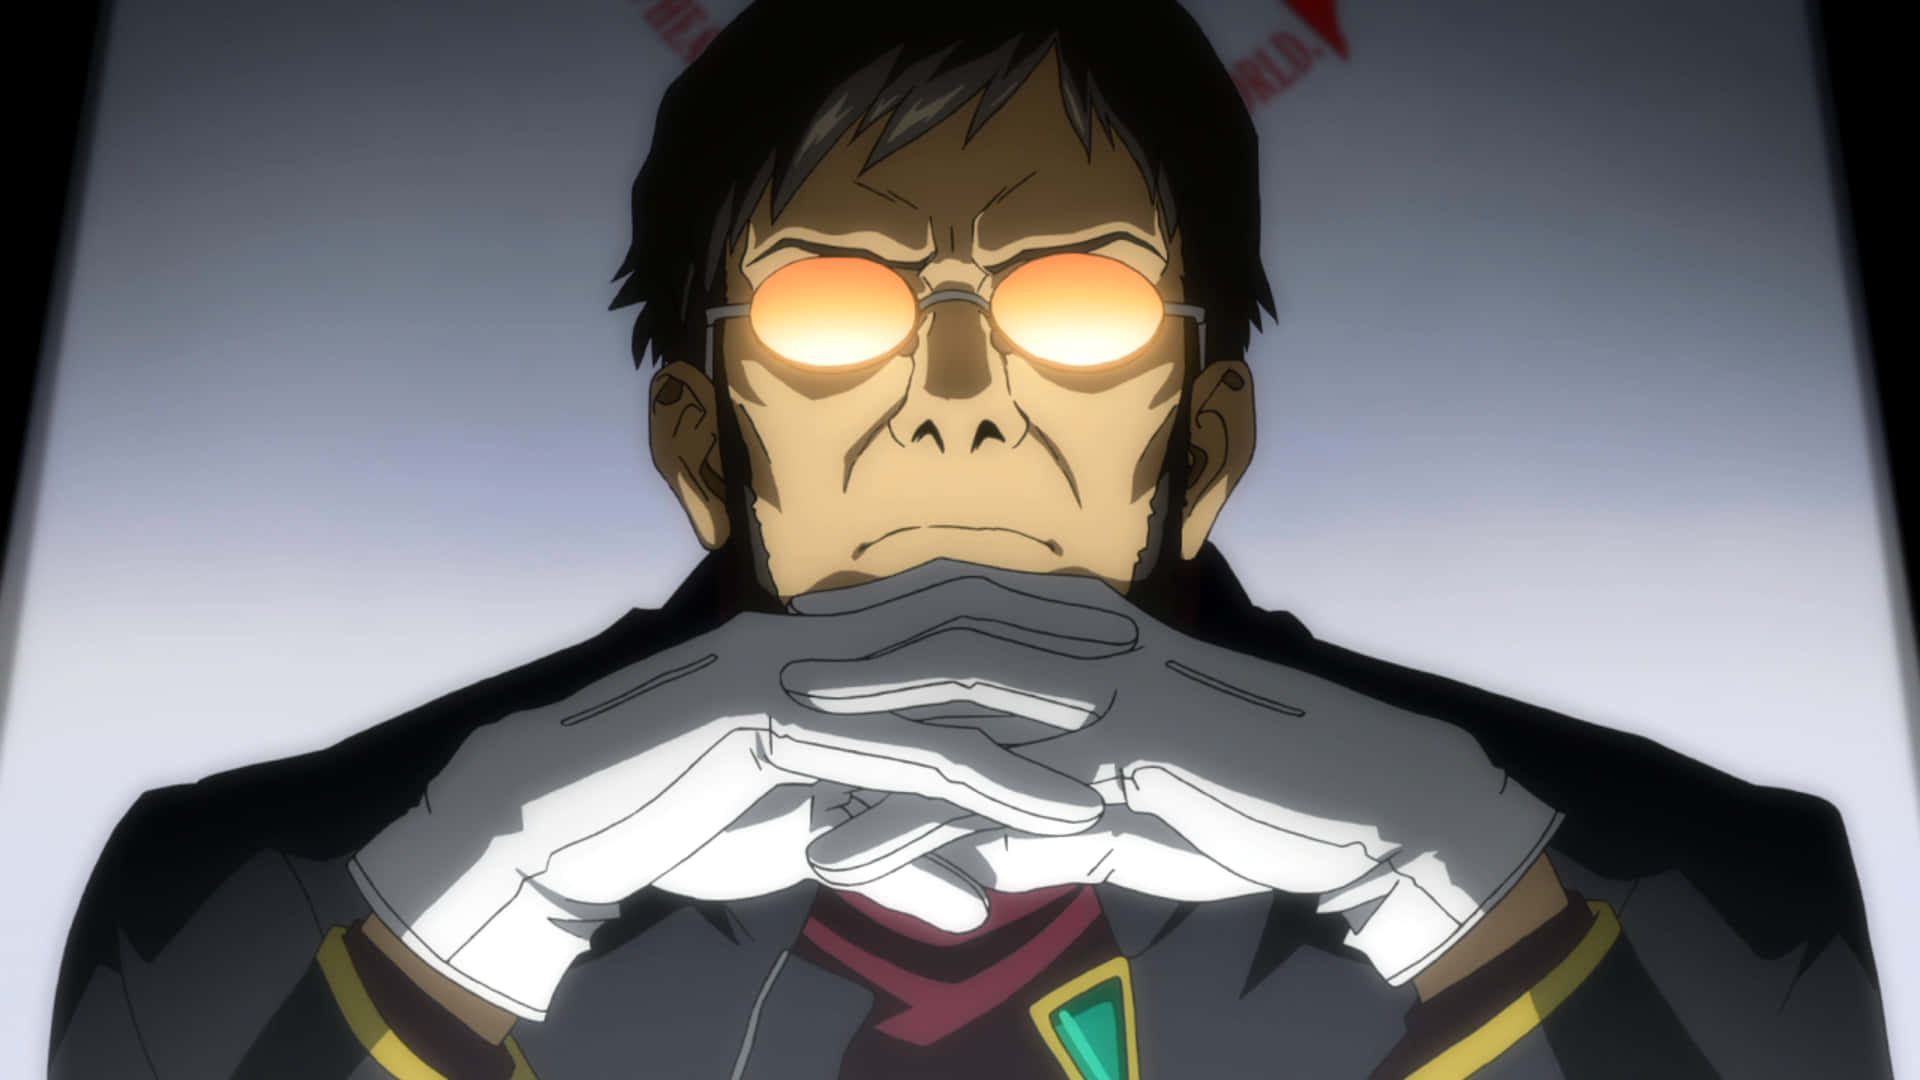 Gendo Ikari, the enigmatic leader of NERV, standing strong against a vivid background. Wallpaper